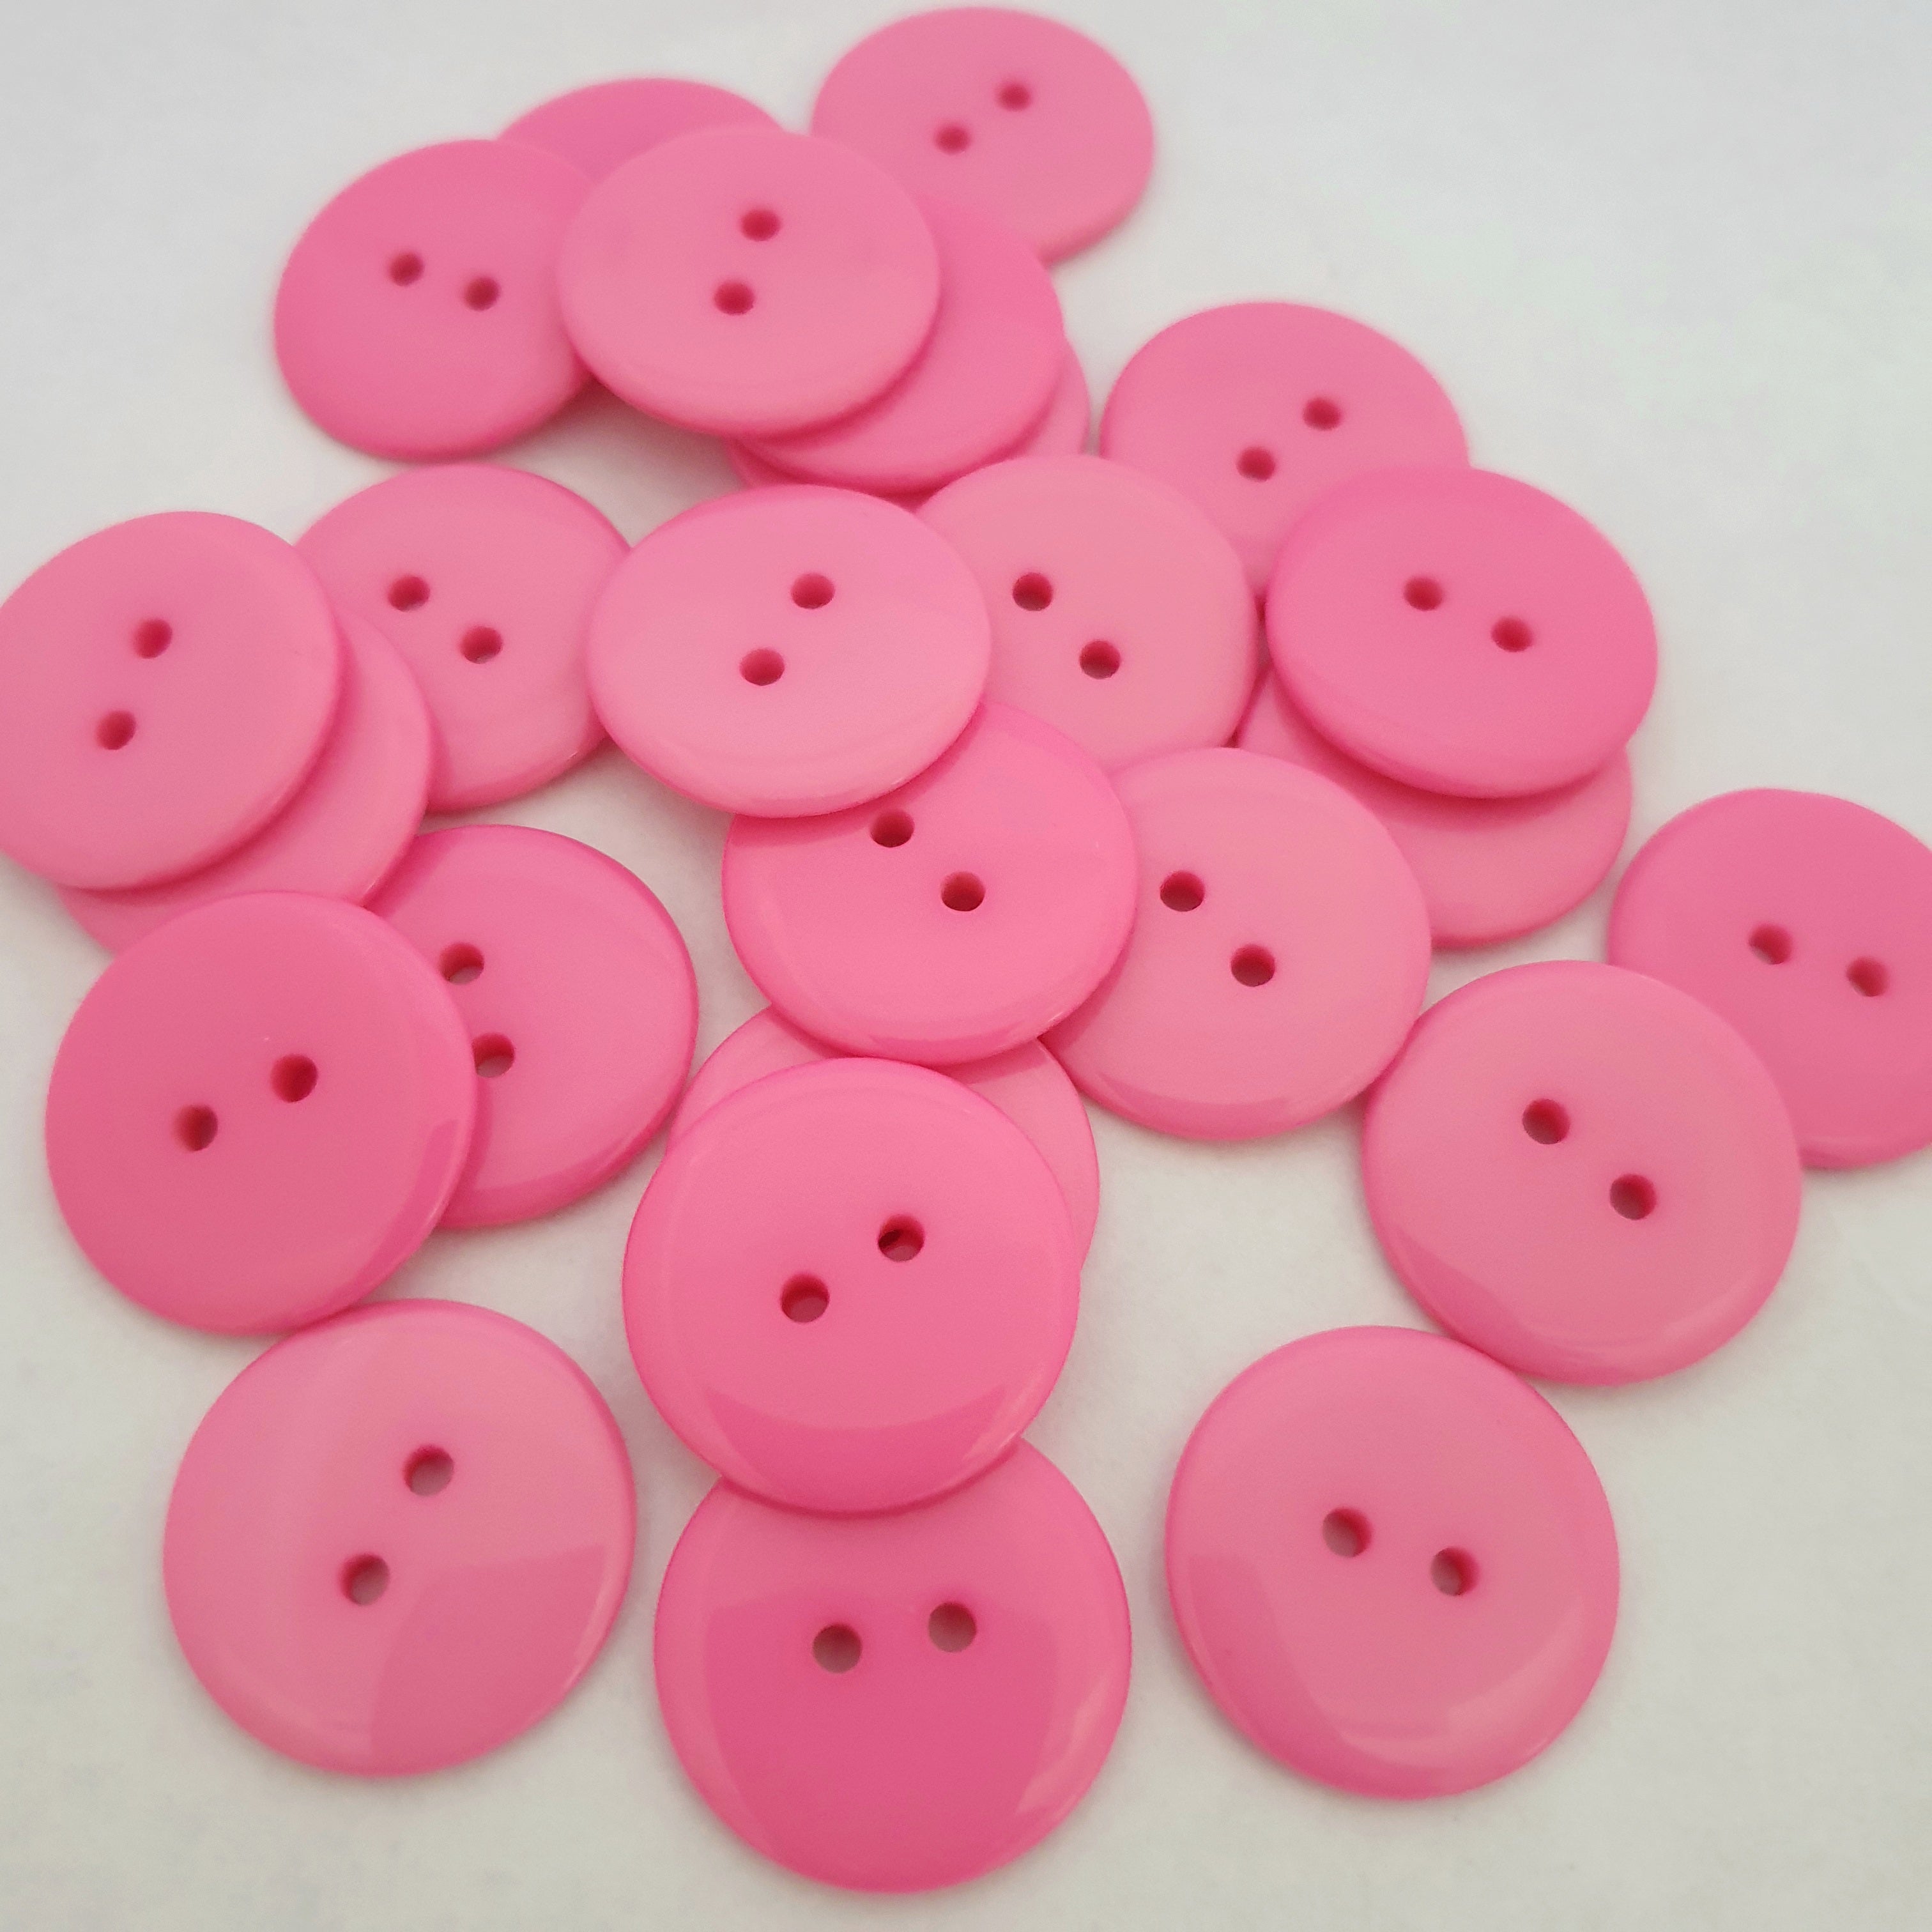 MajorCrafts 36pcs 23mm Bright Pink 2 Holes Round Large Resin Sewing Buttons